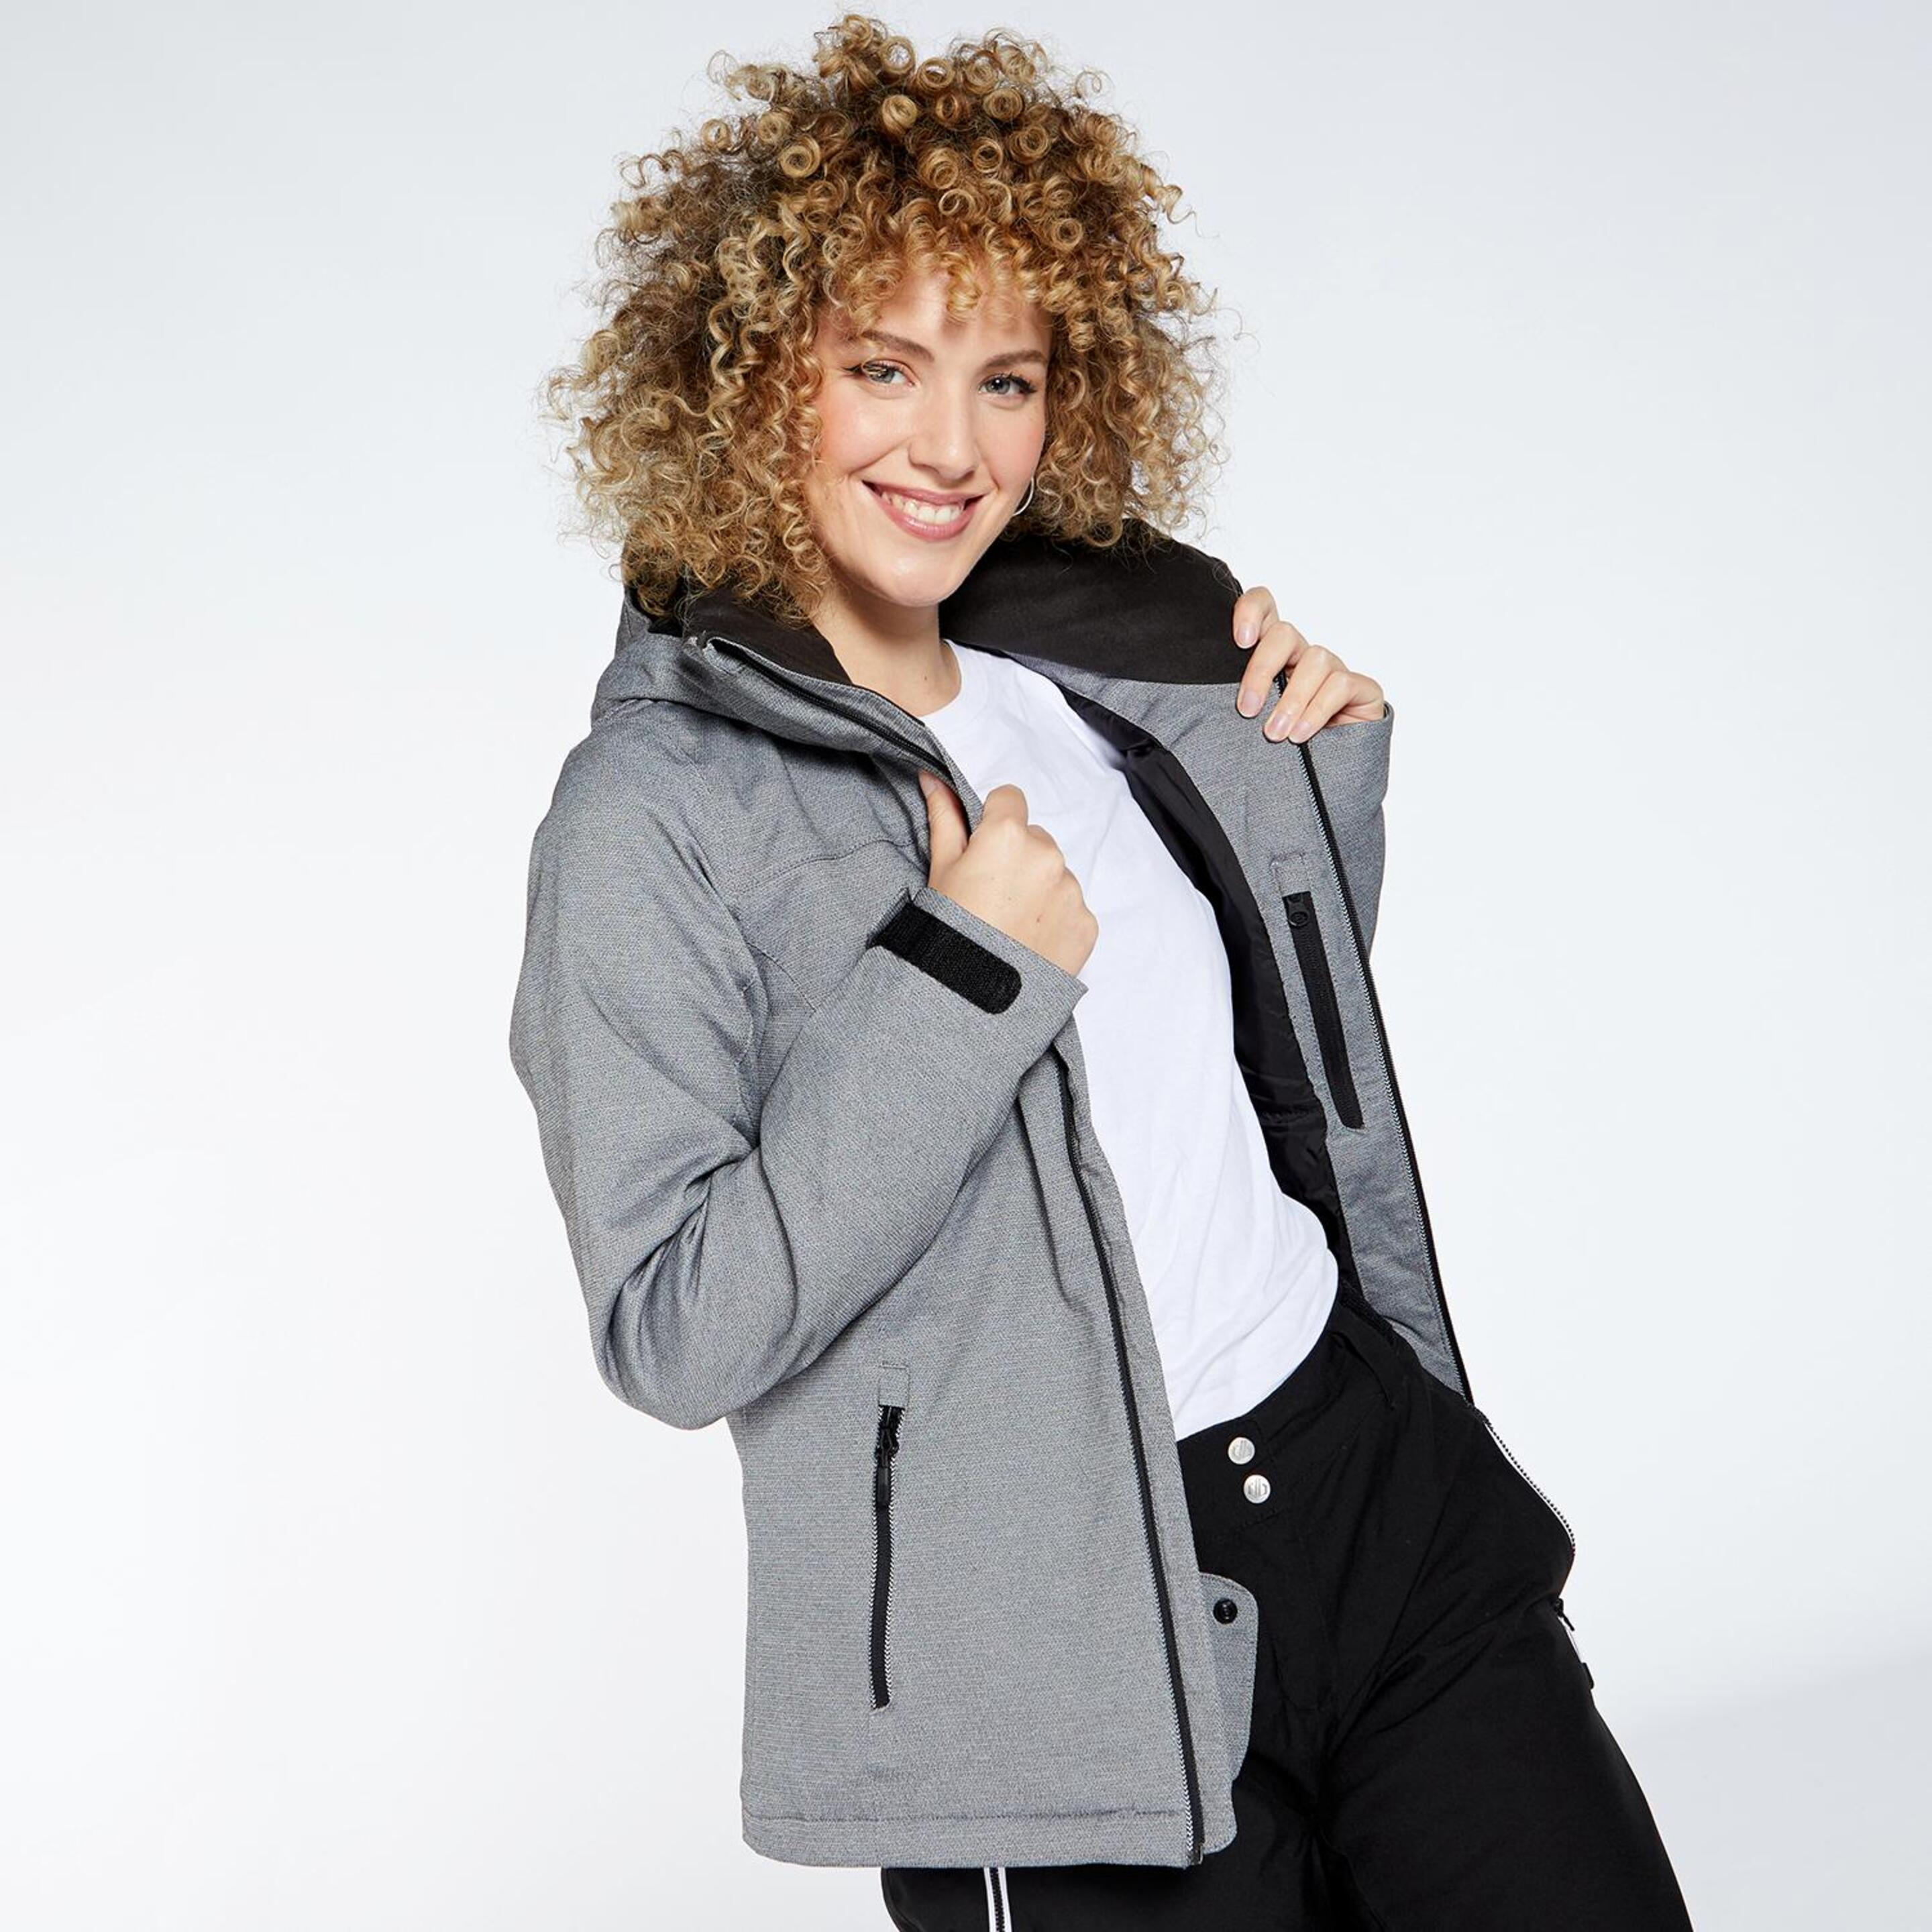 Oneill Stuvite - Gris - Chaqueta Esquí Mujer